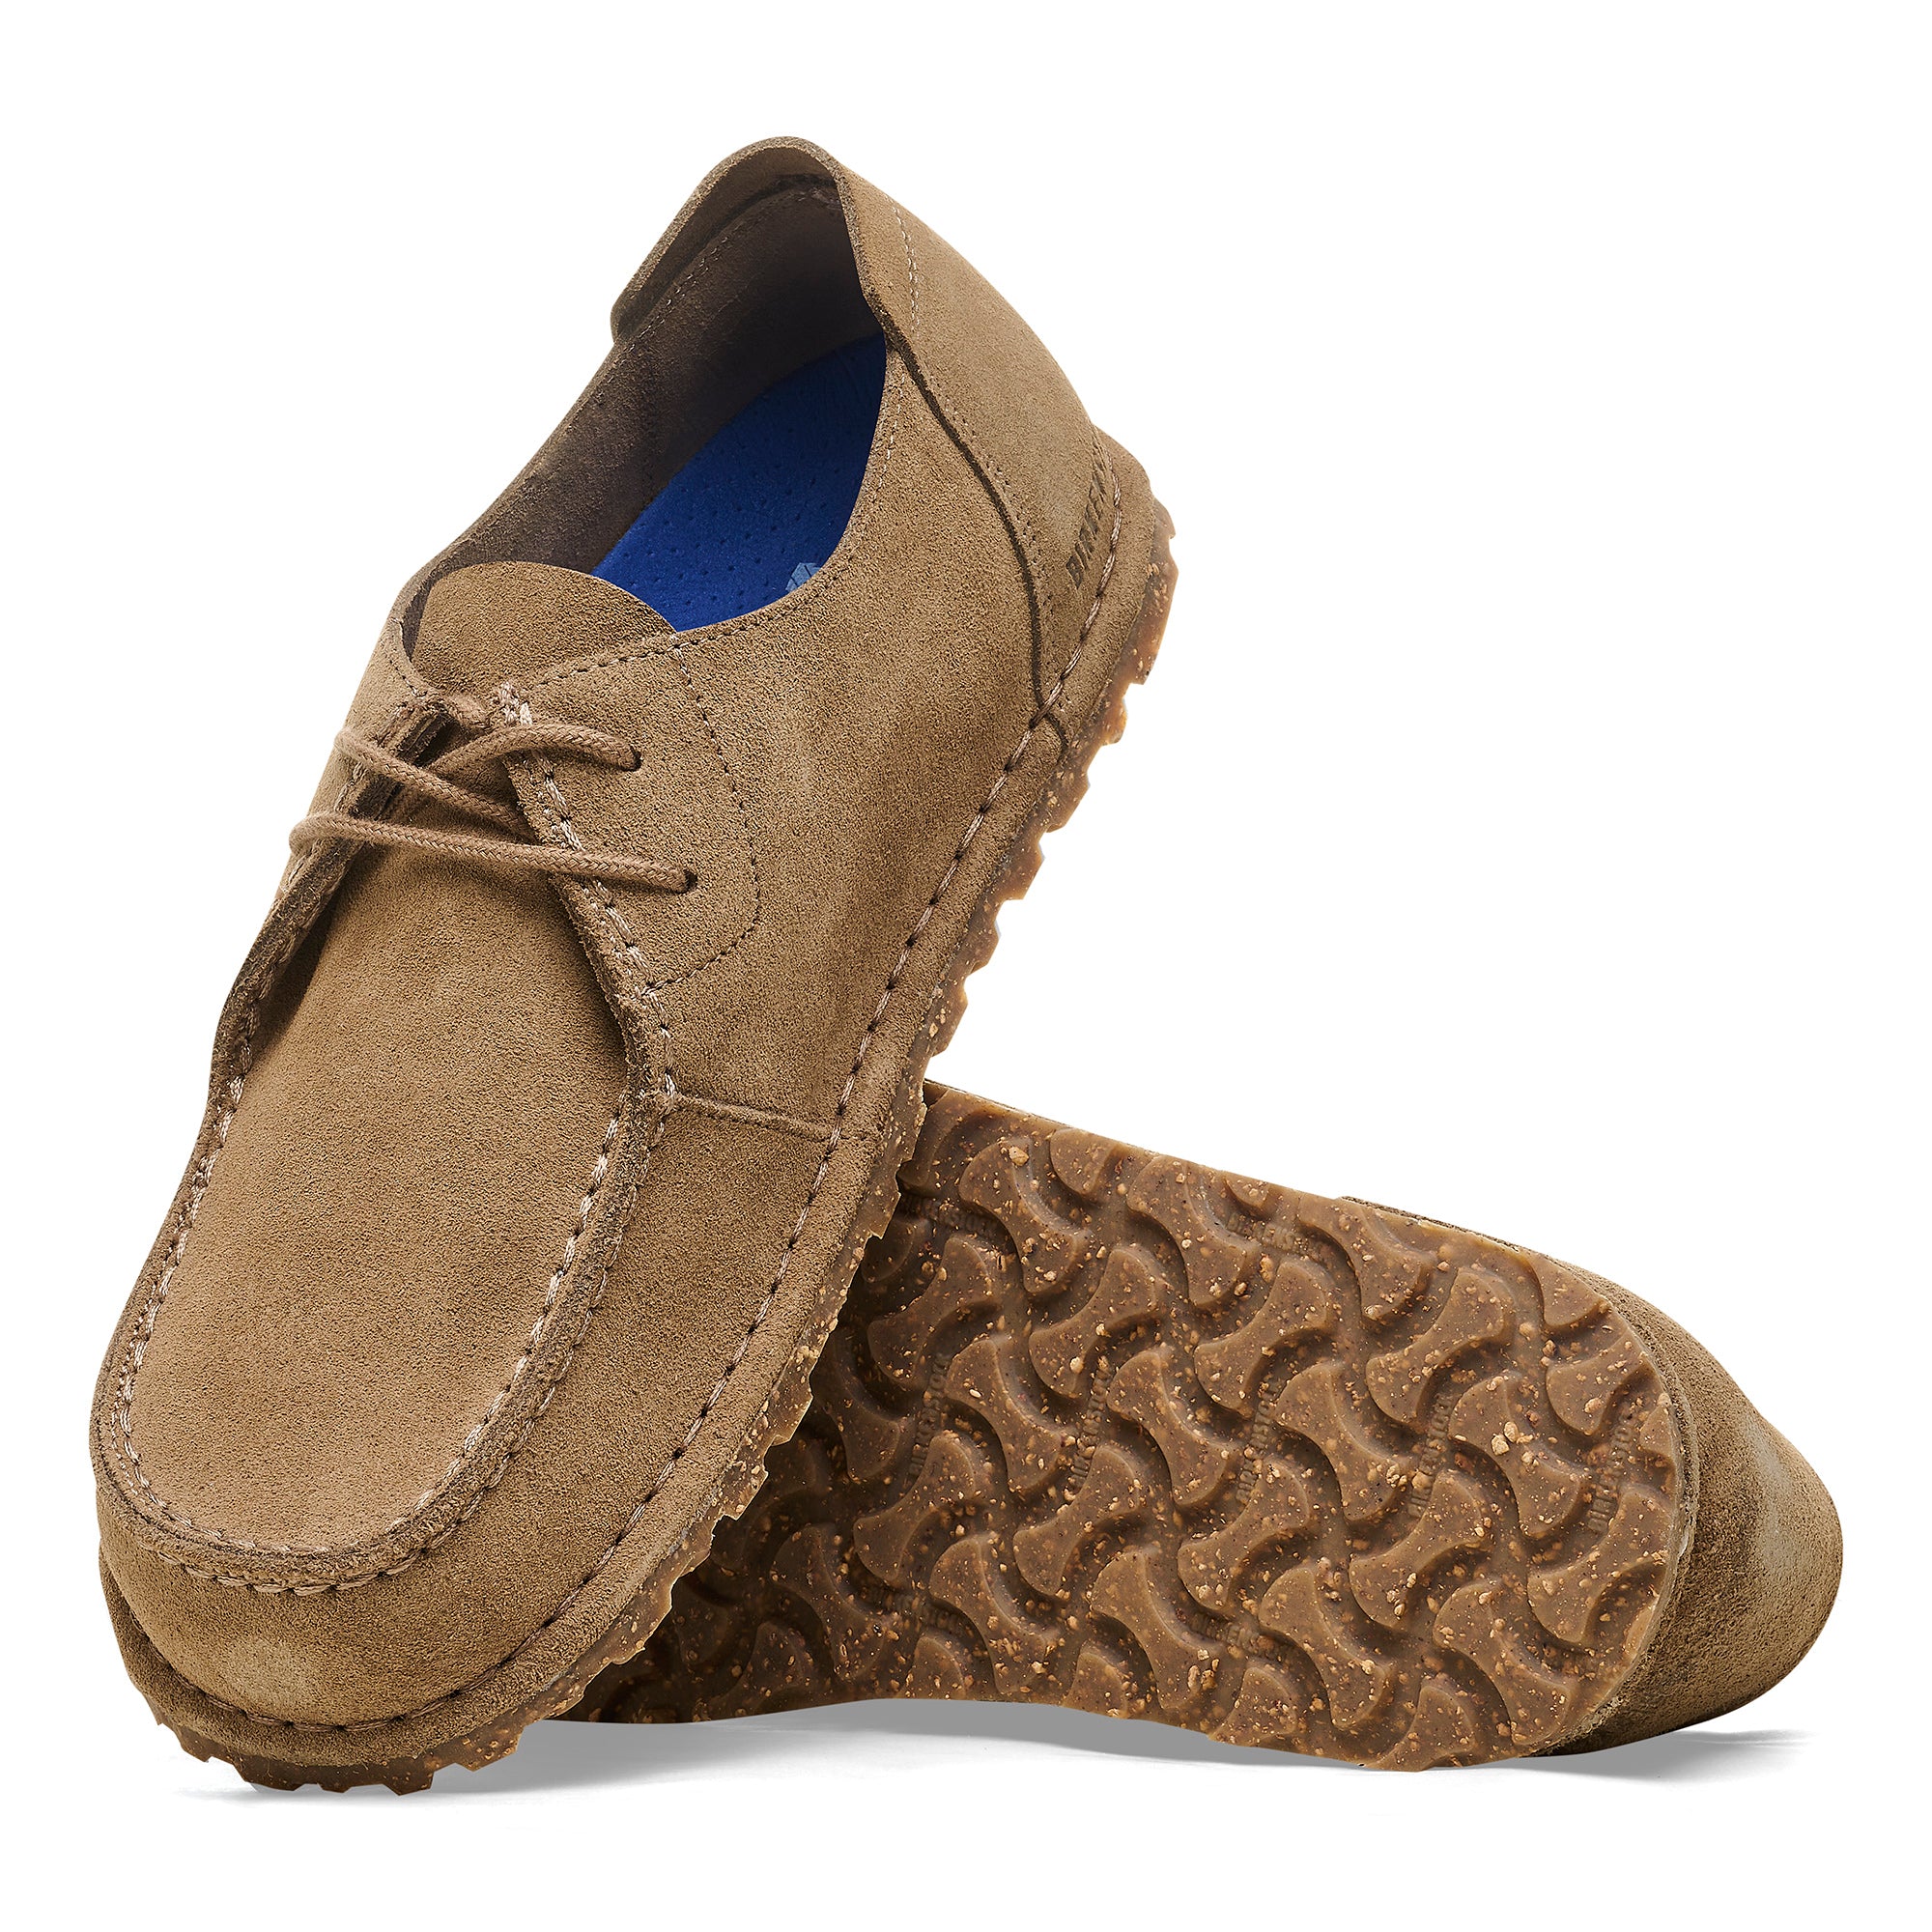 Birkenstock Limited Edition Utti Lace taupe suede